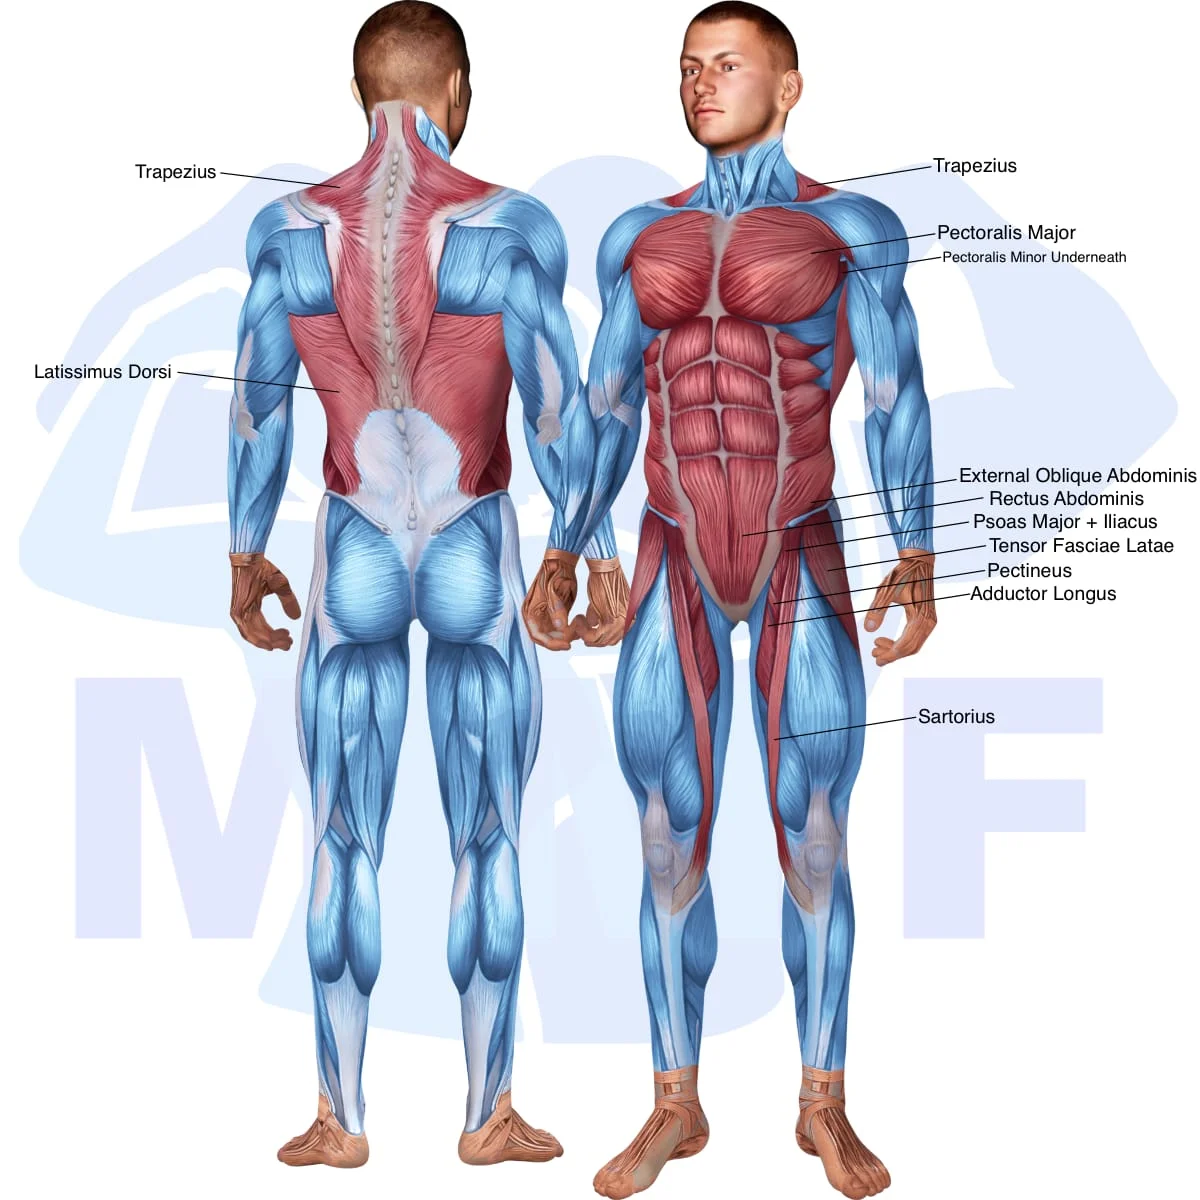 Image of the skeletal muscular system with the muscles used in the incline leg hip raise exercise highlighted in red and the rest in blue.